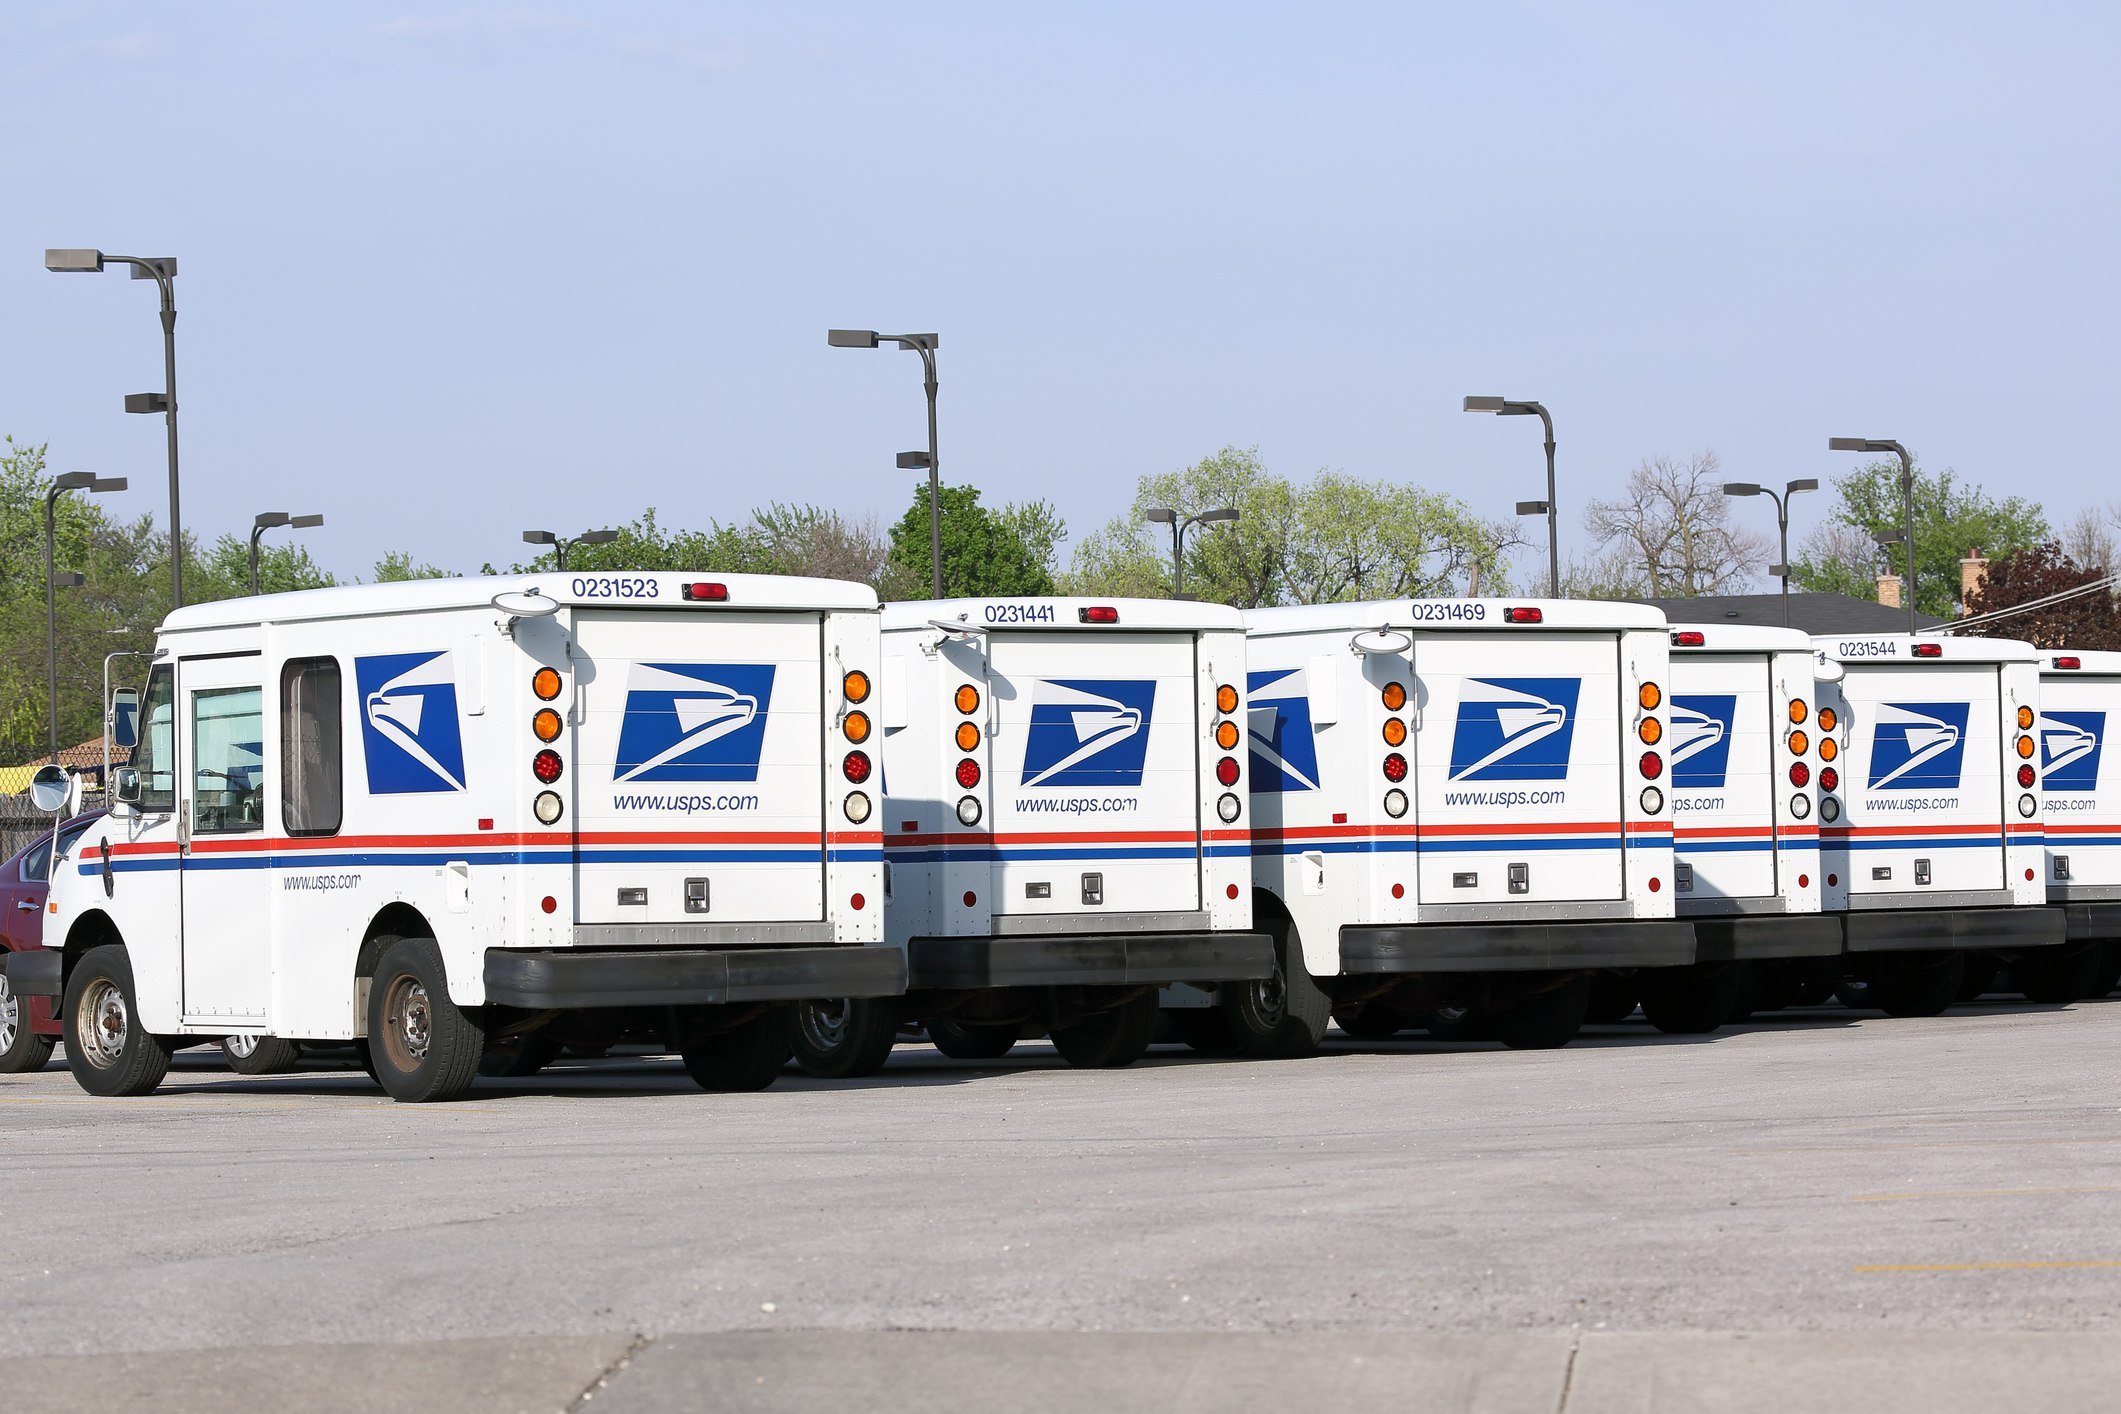 Fleet of USPS mail delivery trucks